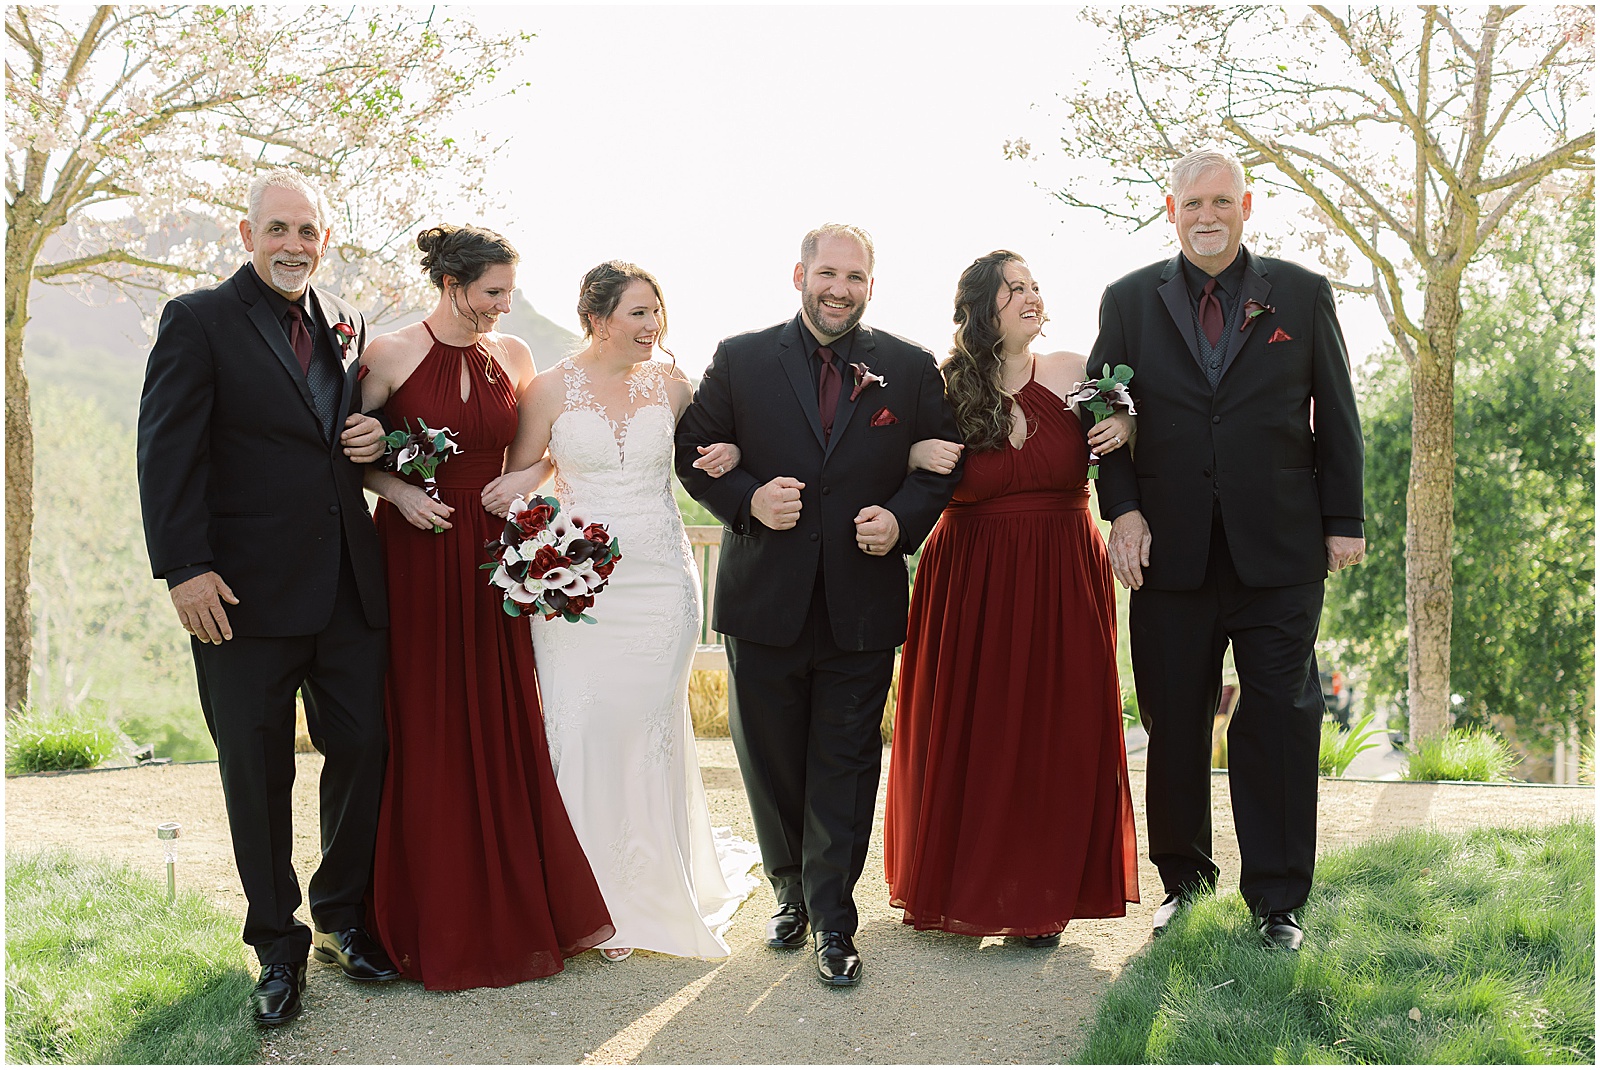 Groom, bride and bridal party walking together during Monterey wedding day